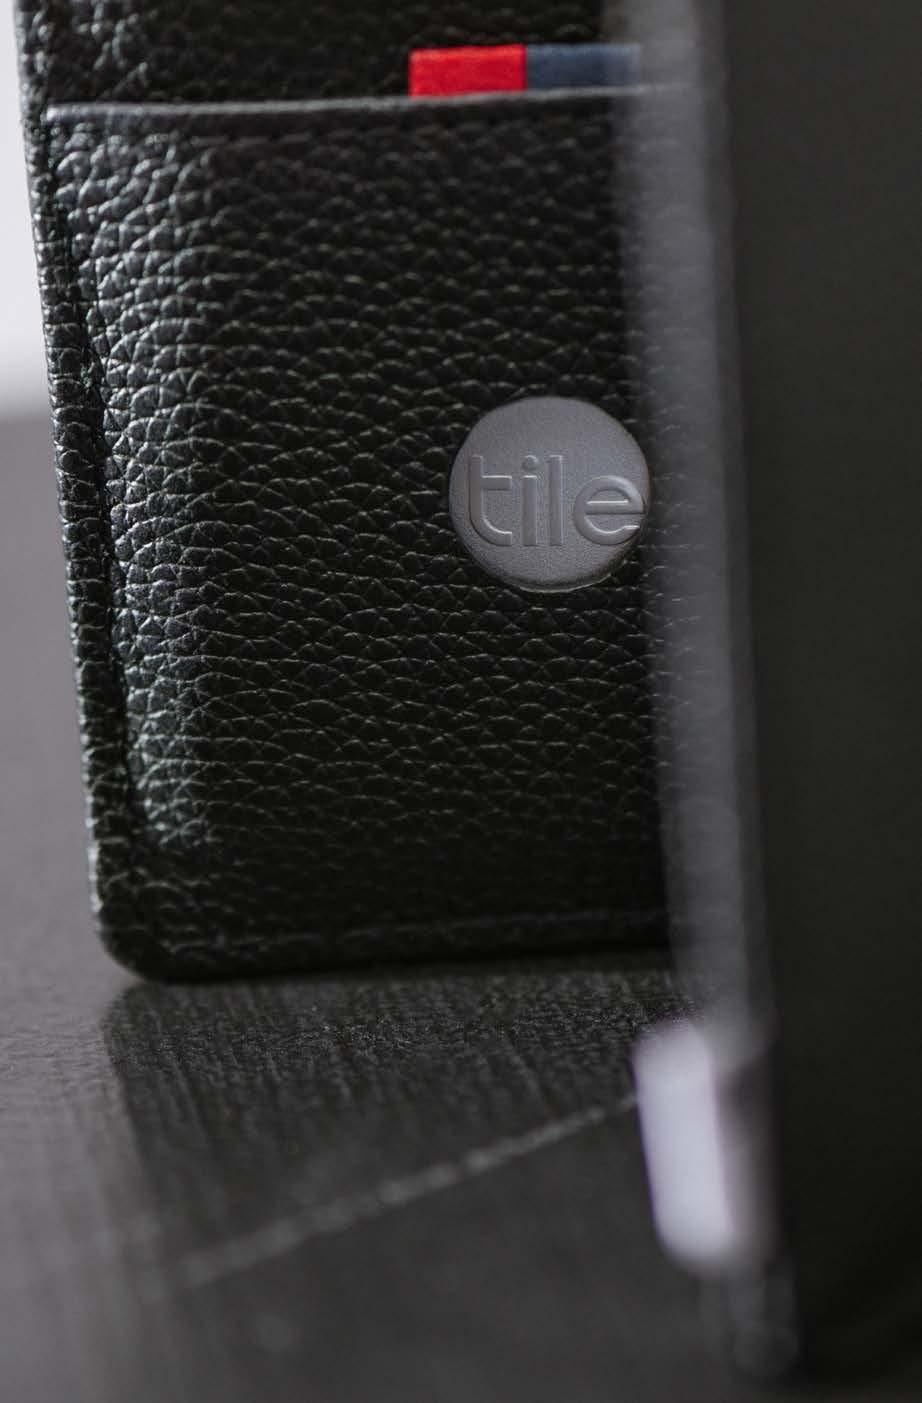 031 10420 KEY CHAIN Tile Mate Bluetooth tracker LEATHER + + High quality textured leather + + Engineered Tile sleeve with